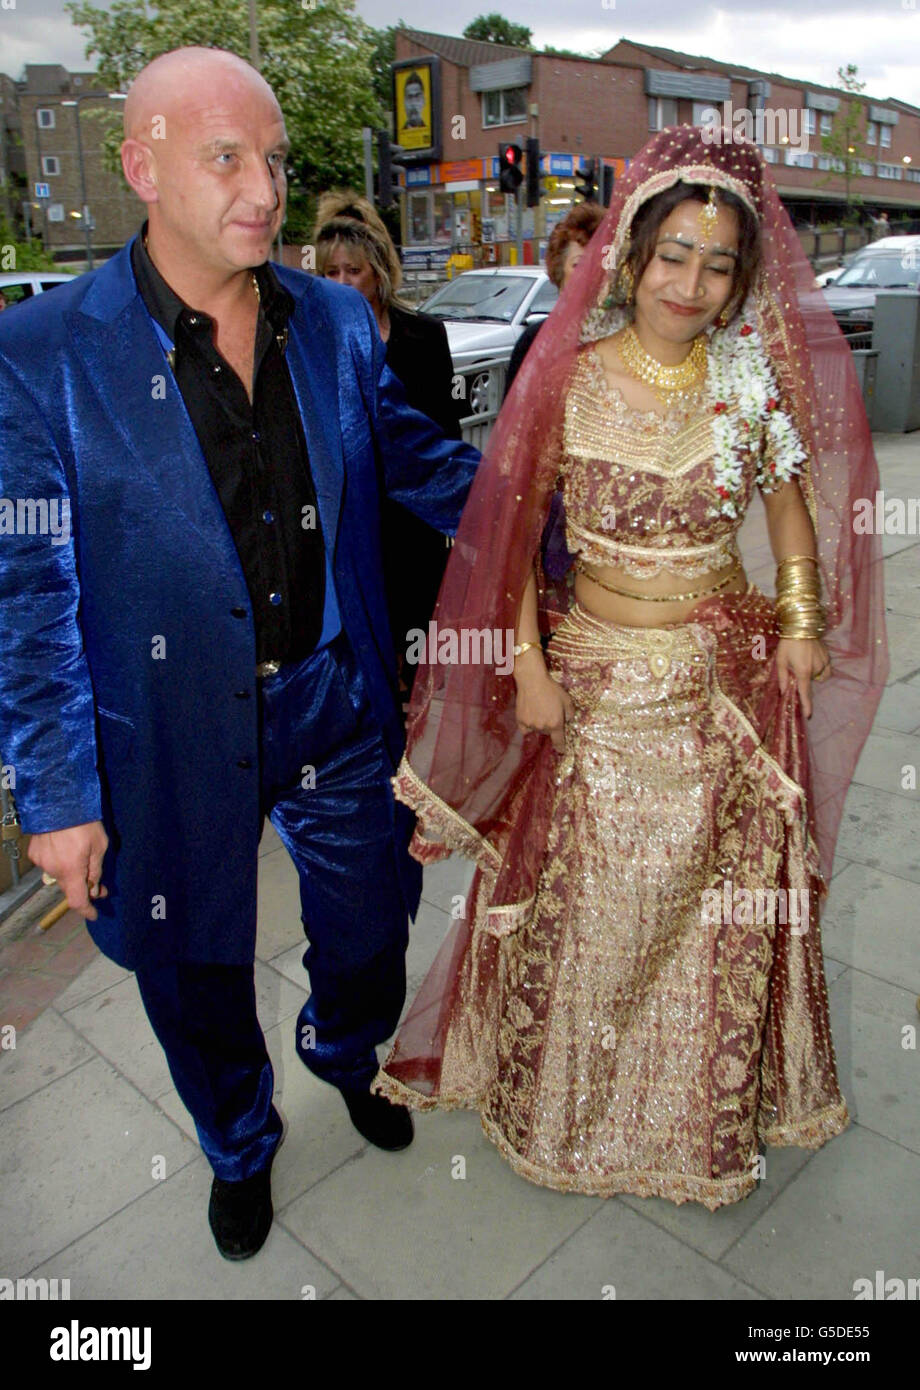 Dave Courtney and Saira Bronson, wearing a traditional Asian wedding gown, arrive at the Manhattan Cafe in Woolwich, south east London for a reception after her marriage to Britain's most dangerous inmate Charles Bronson, at Milton Keynes Prison. Stock Photo